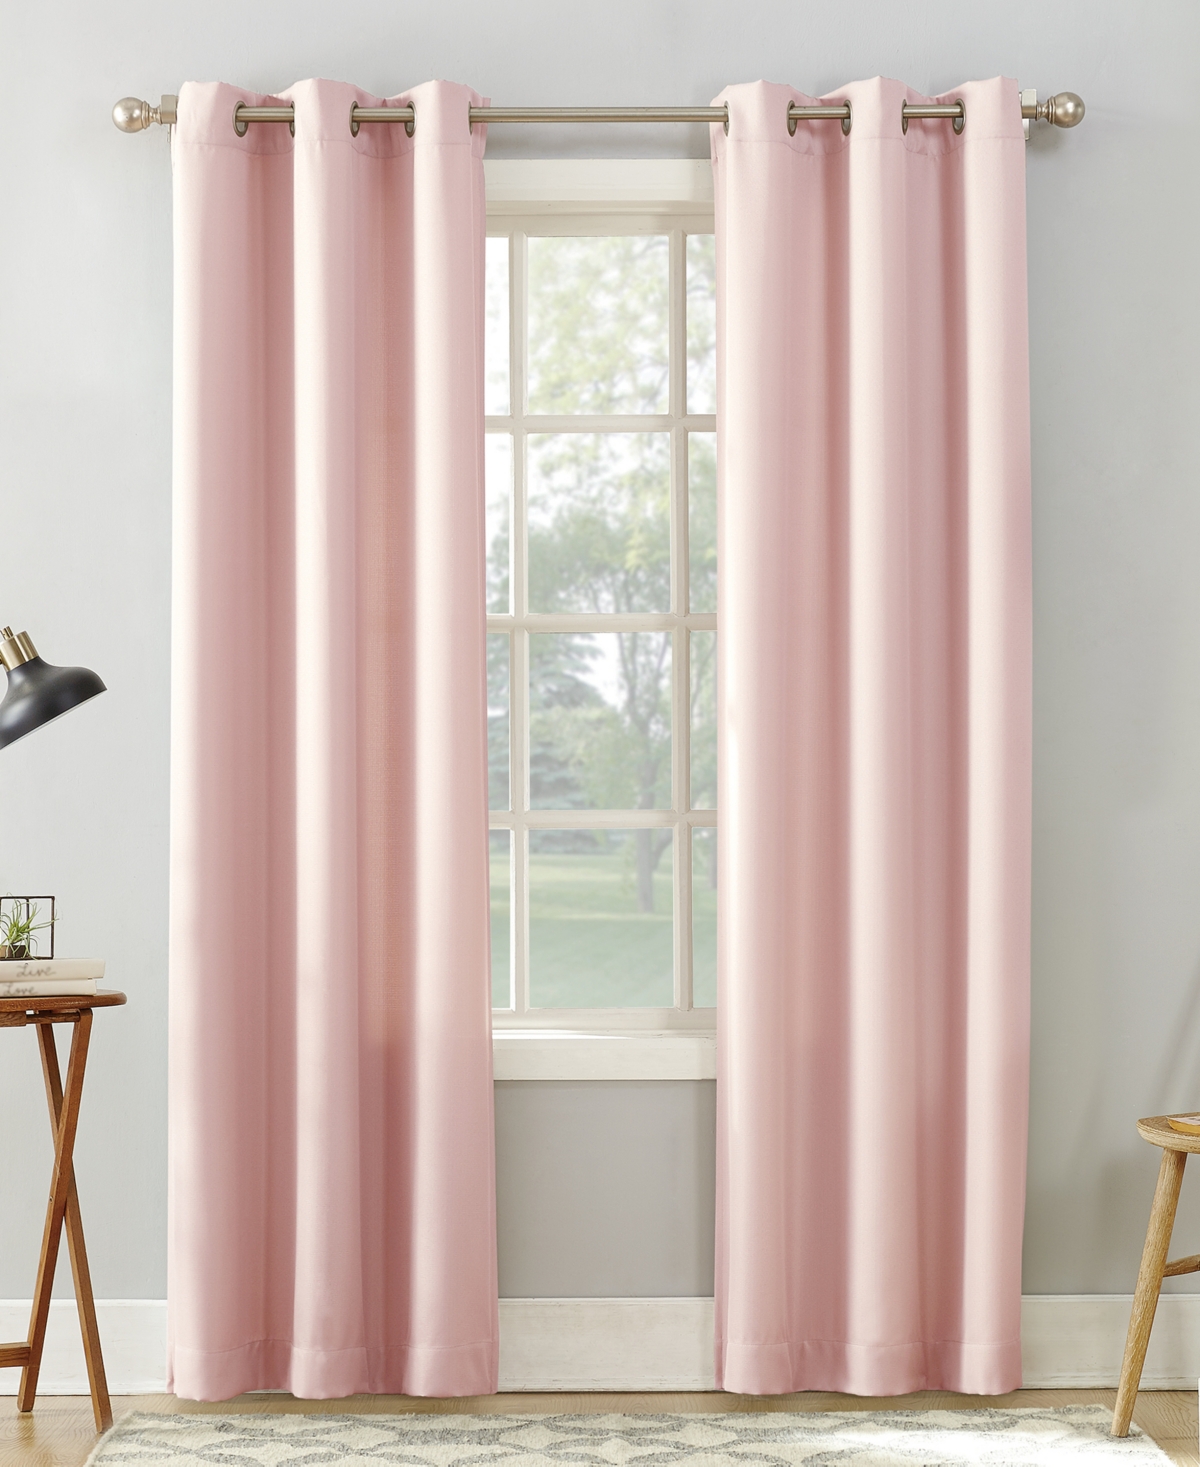 No. 918 Valerie Casual Textured Semi-sheer Grommet Curtain Panel, 40" X 63" In Blush